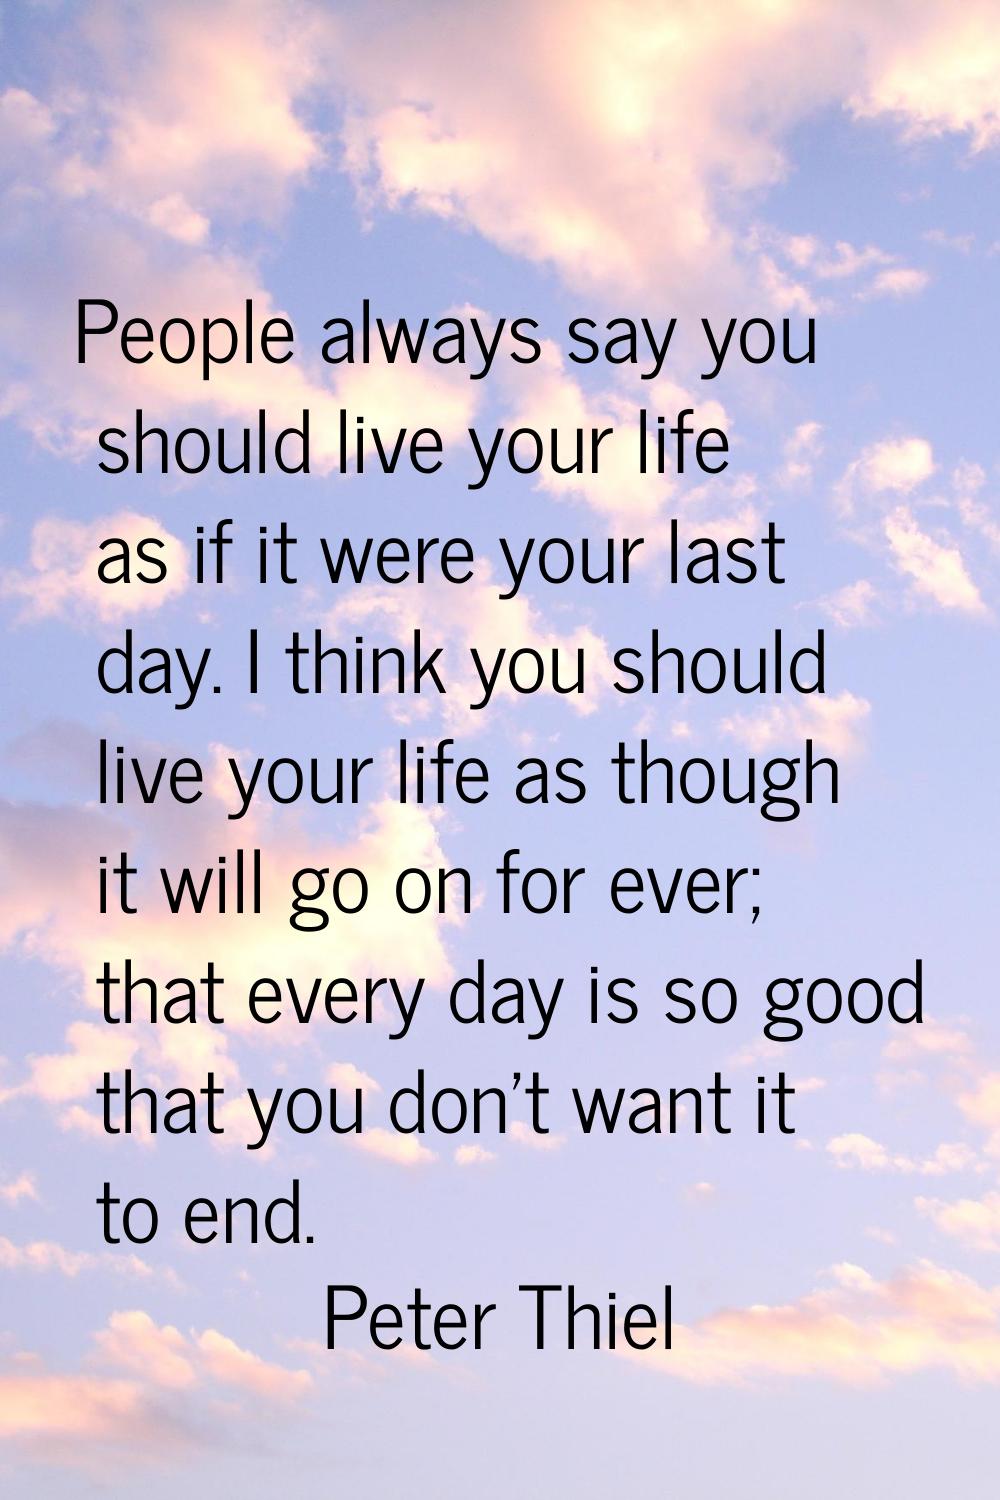 People always say you should live your life as if it were your last day. I think you should live yo